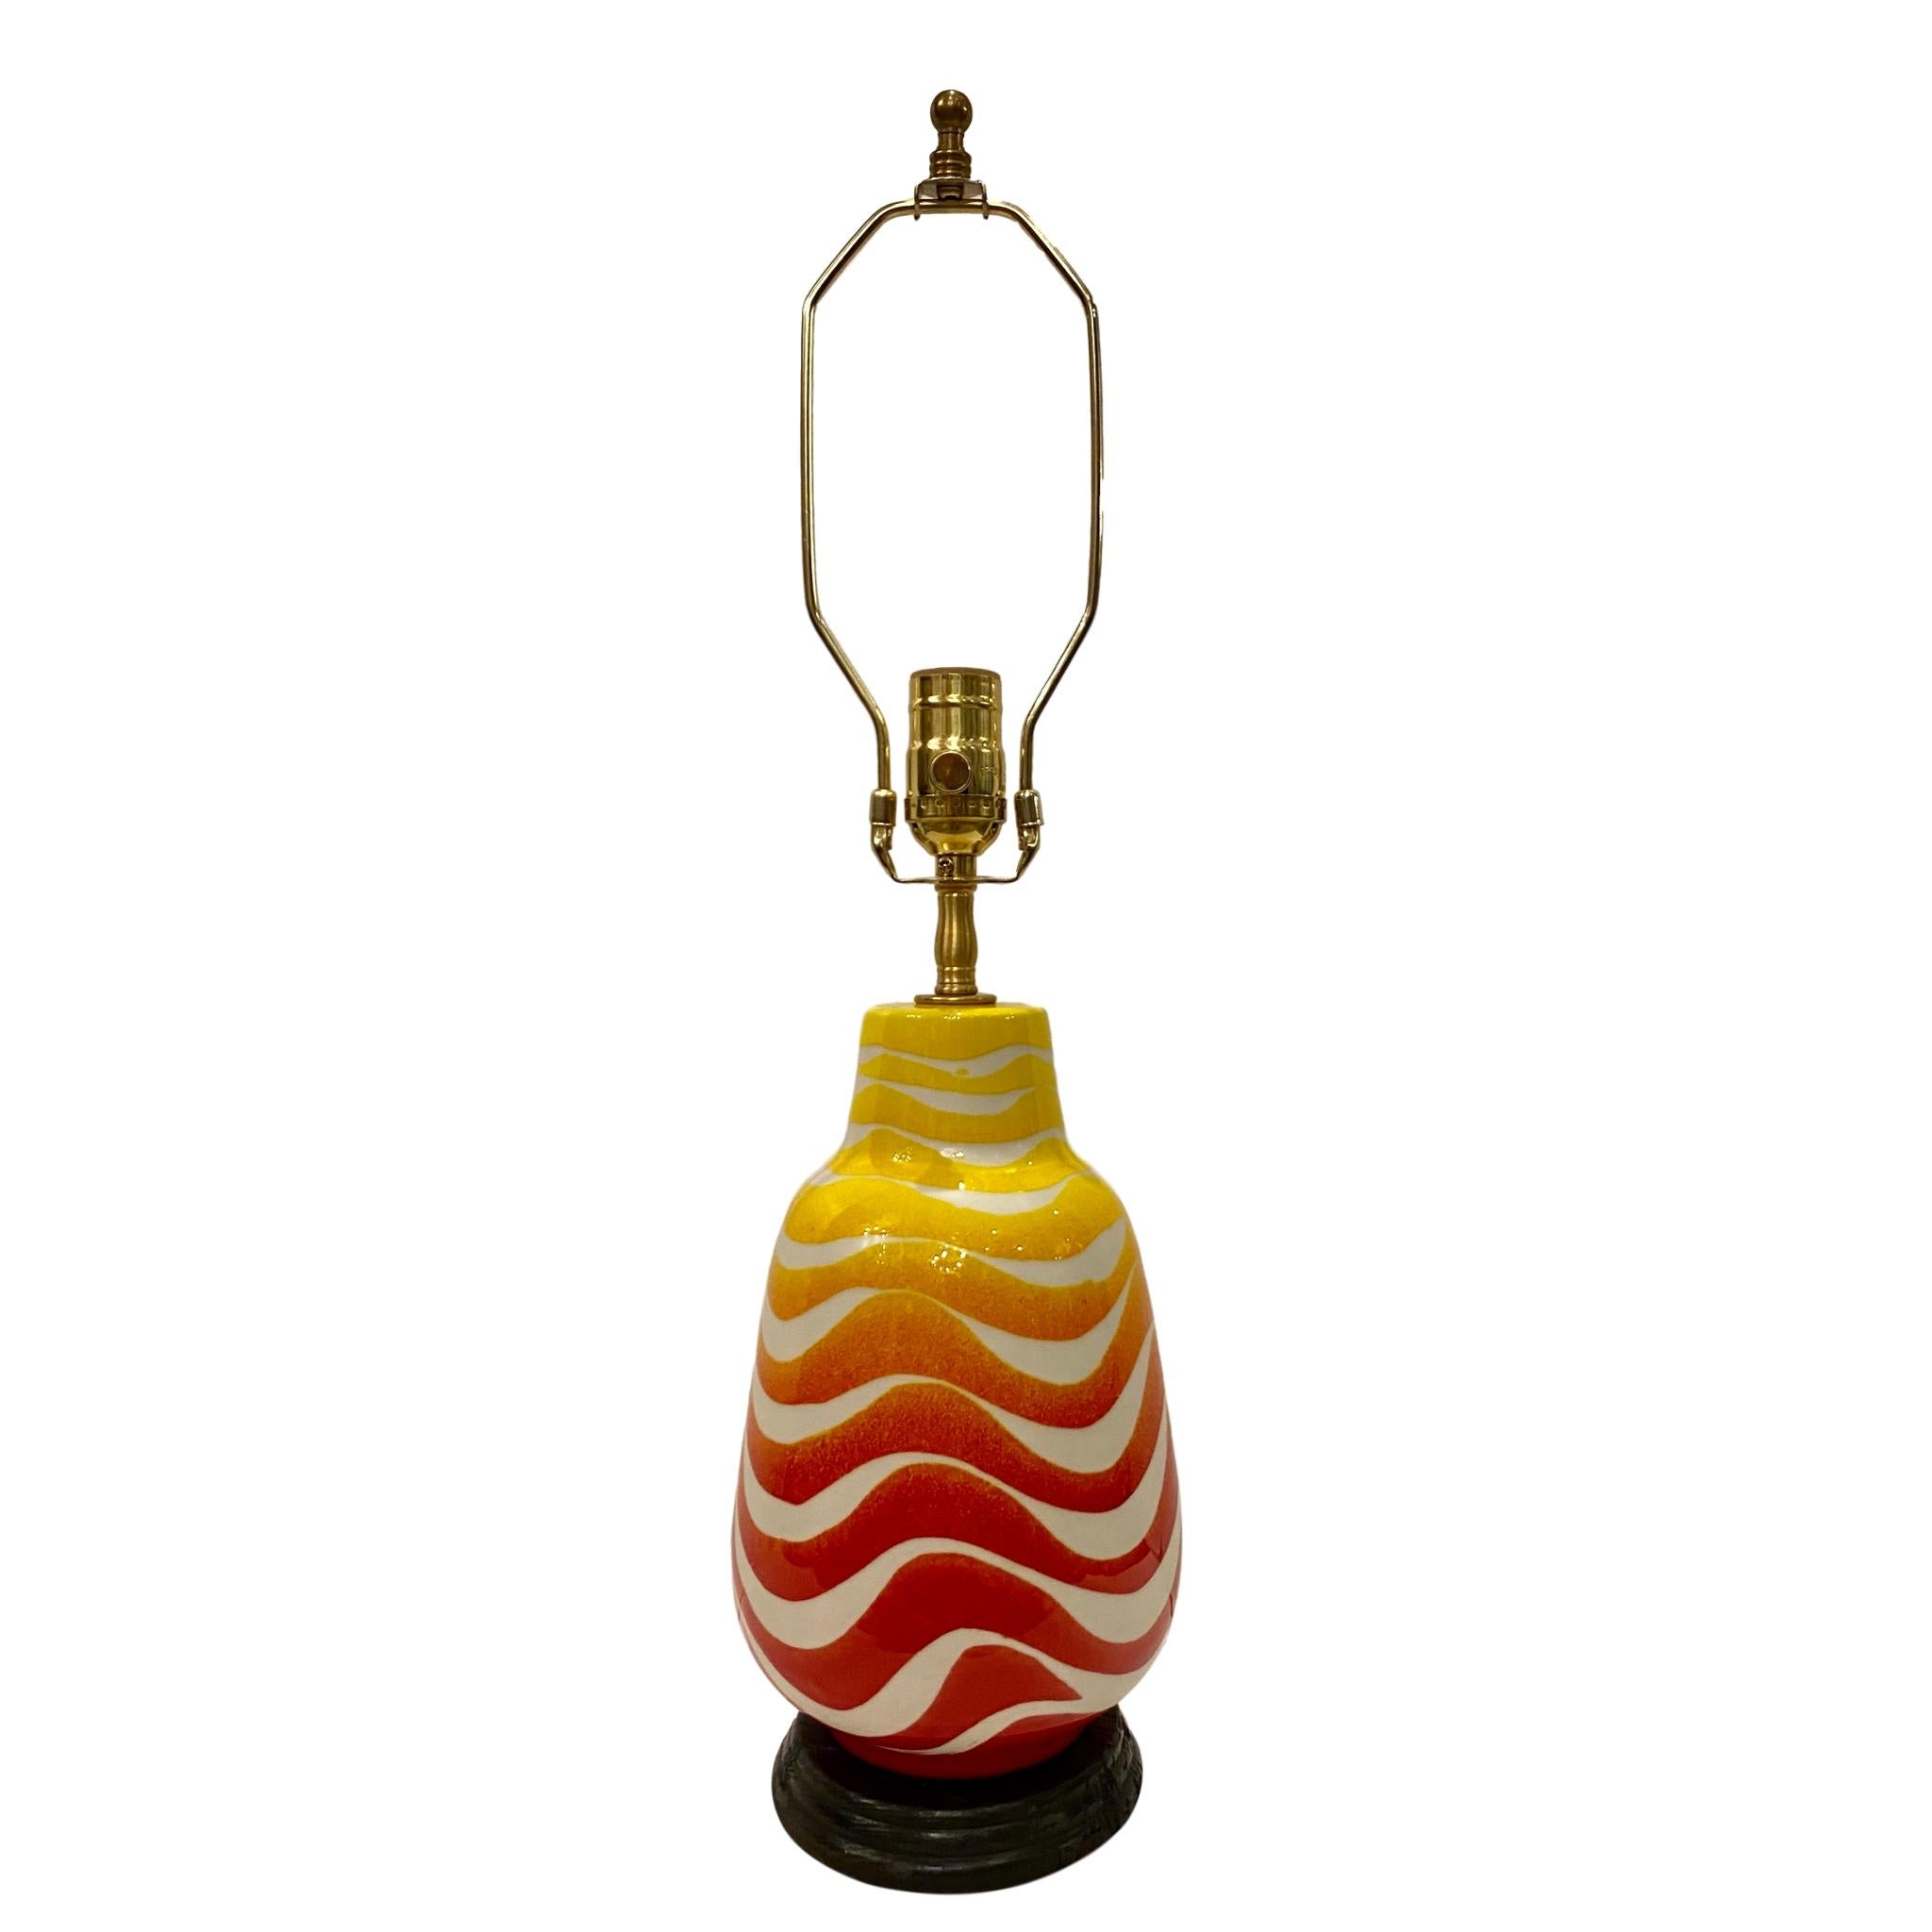 A single circa 1950's Italian glazed porcelain table lamp with a waves patterns of red and yellow on a white background.

Measurements:
Height of body: 11.5